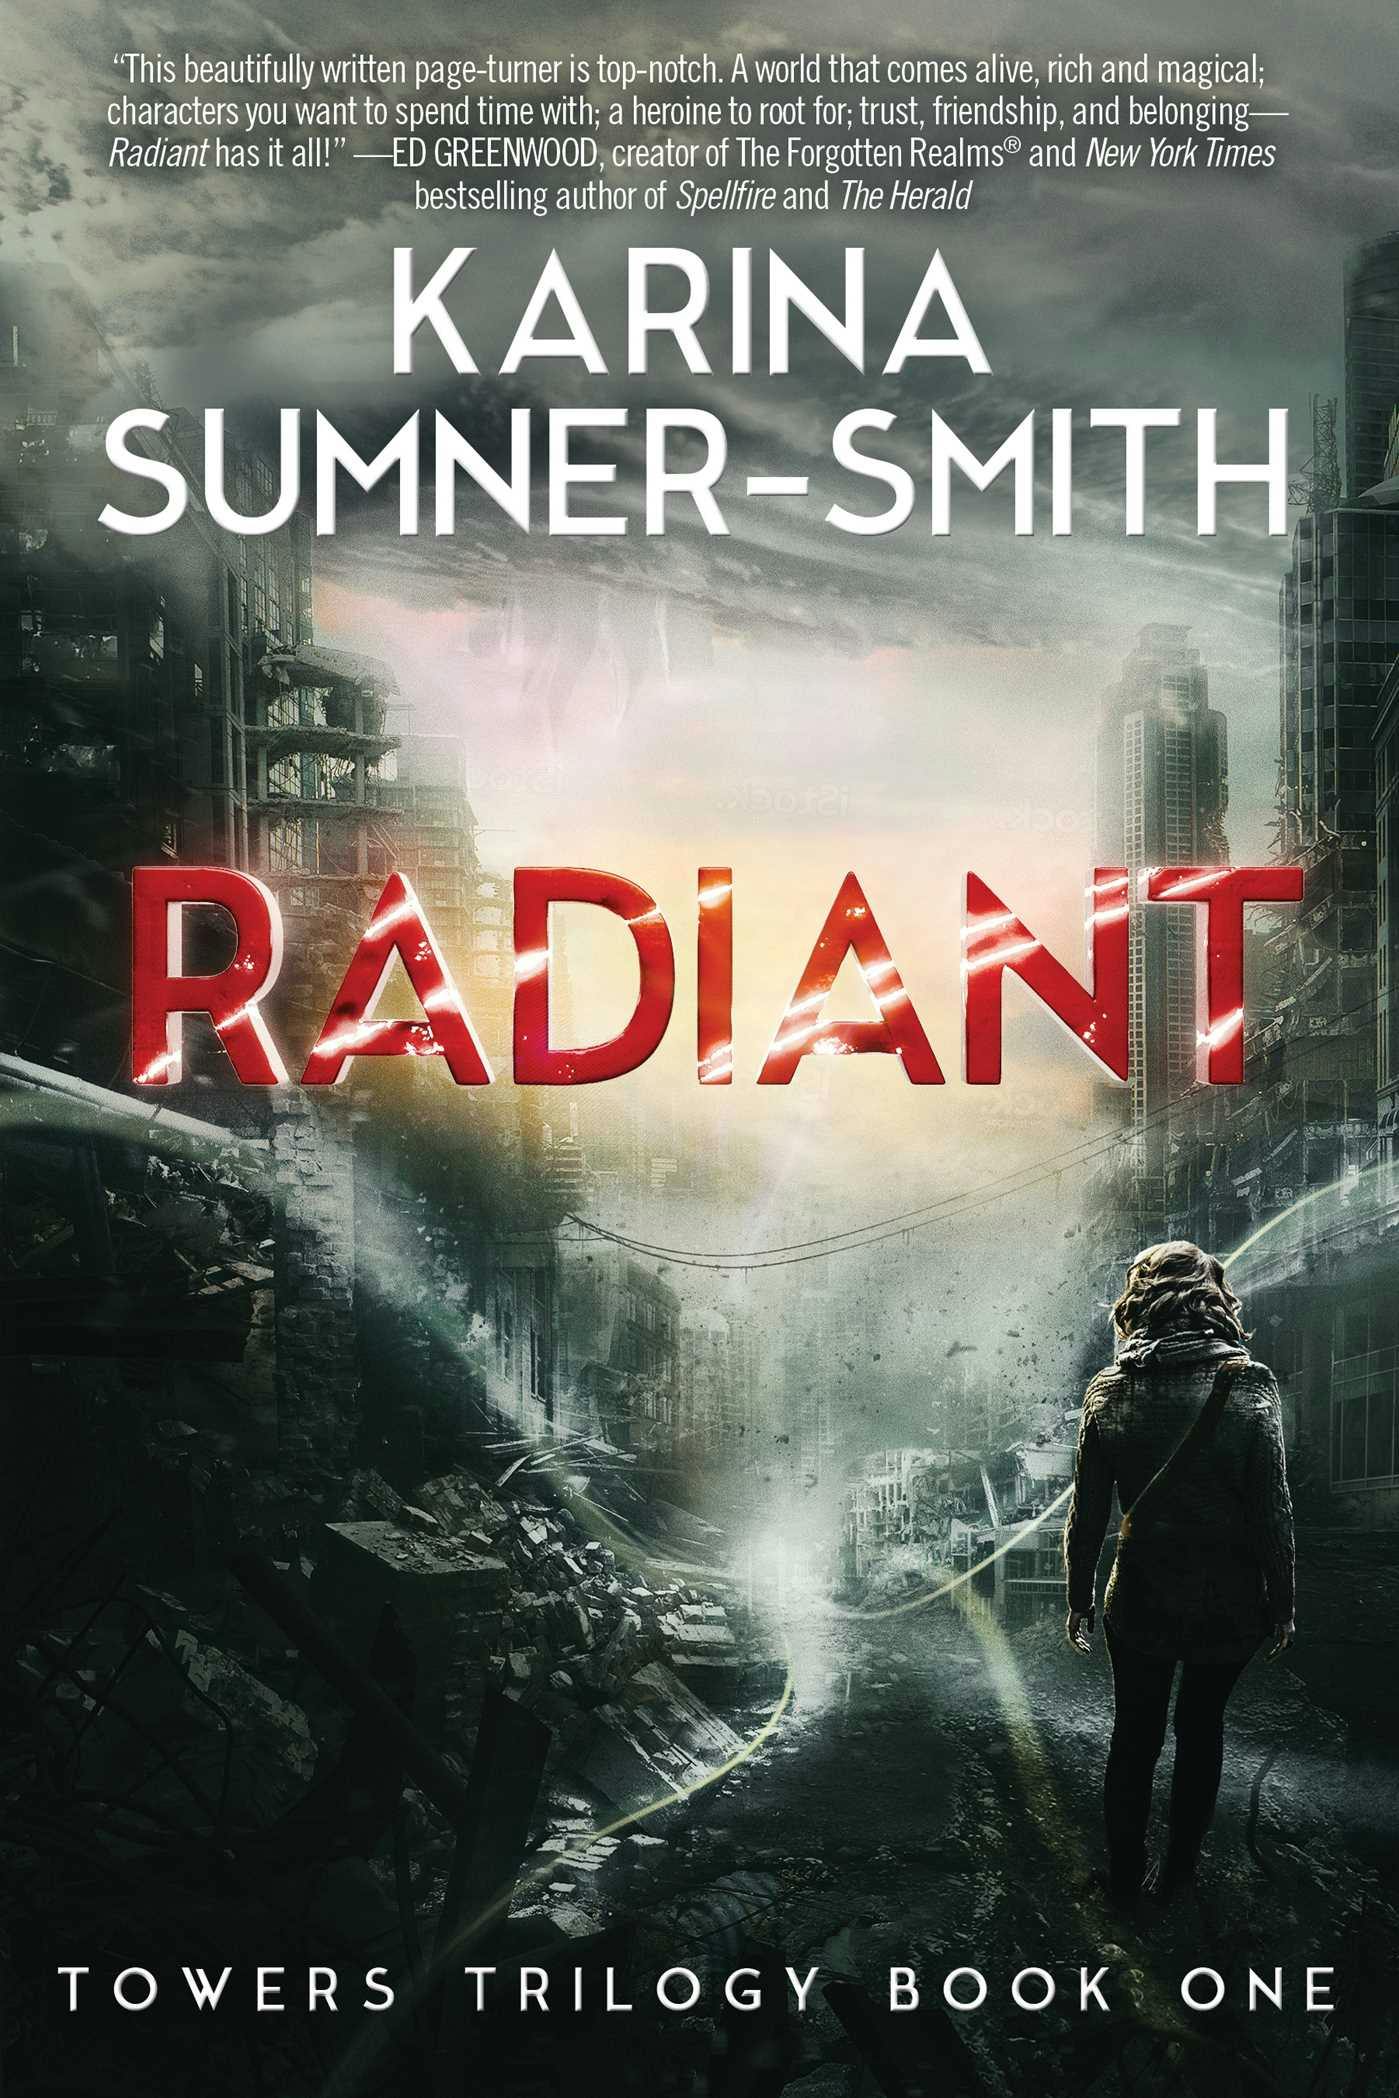 Radiant: Towers Trilogy Book One - Karina Sumner-Smith